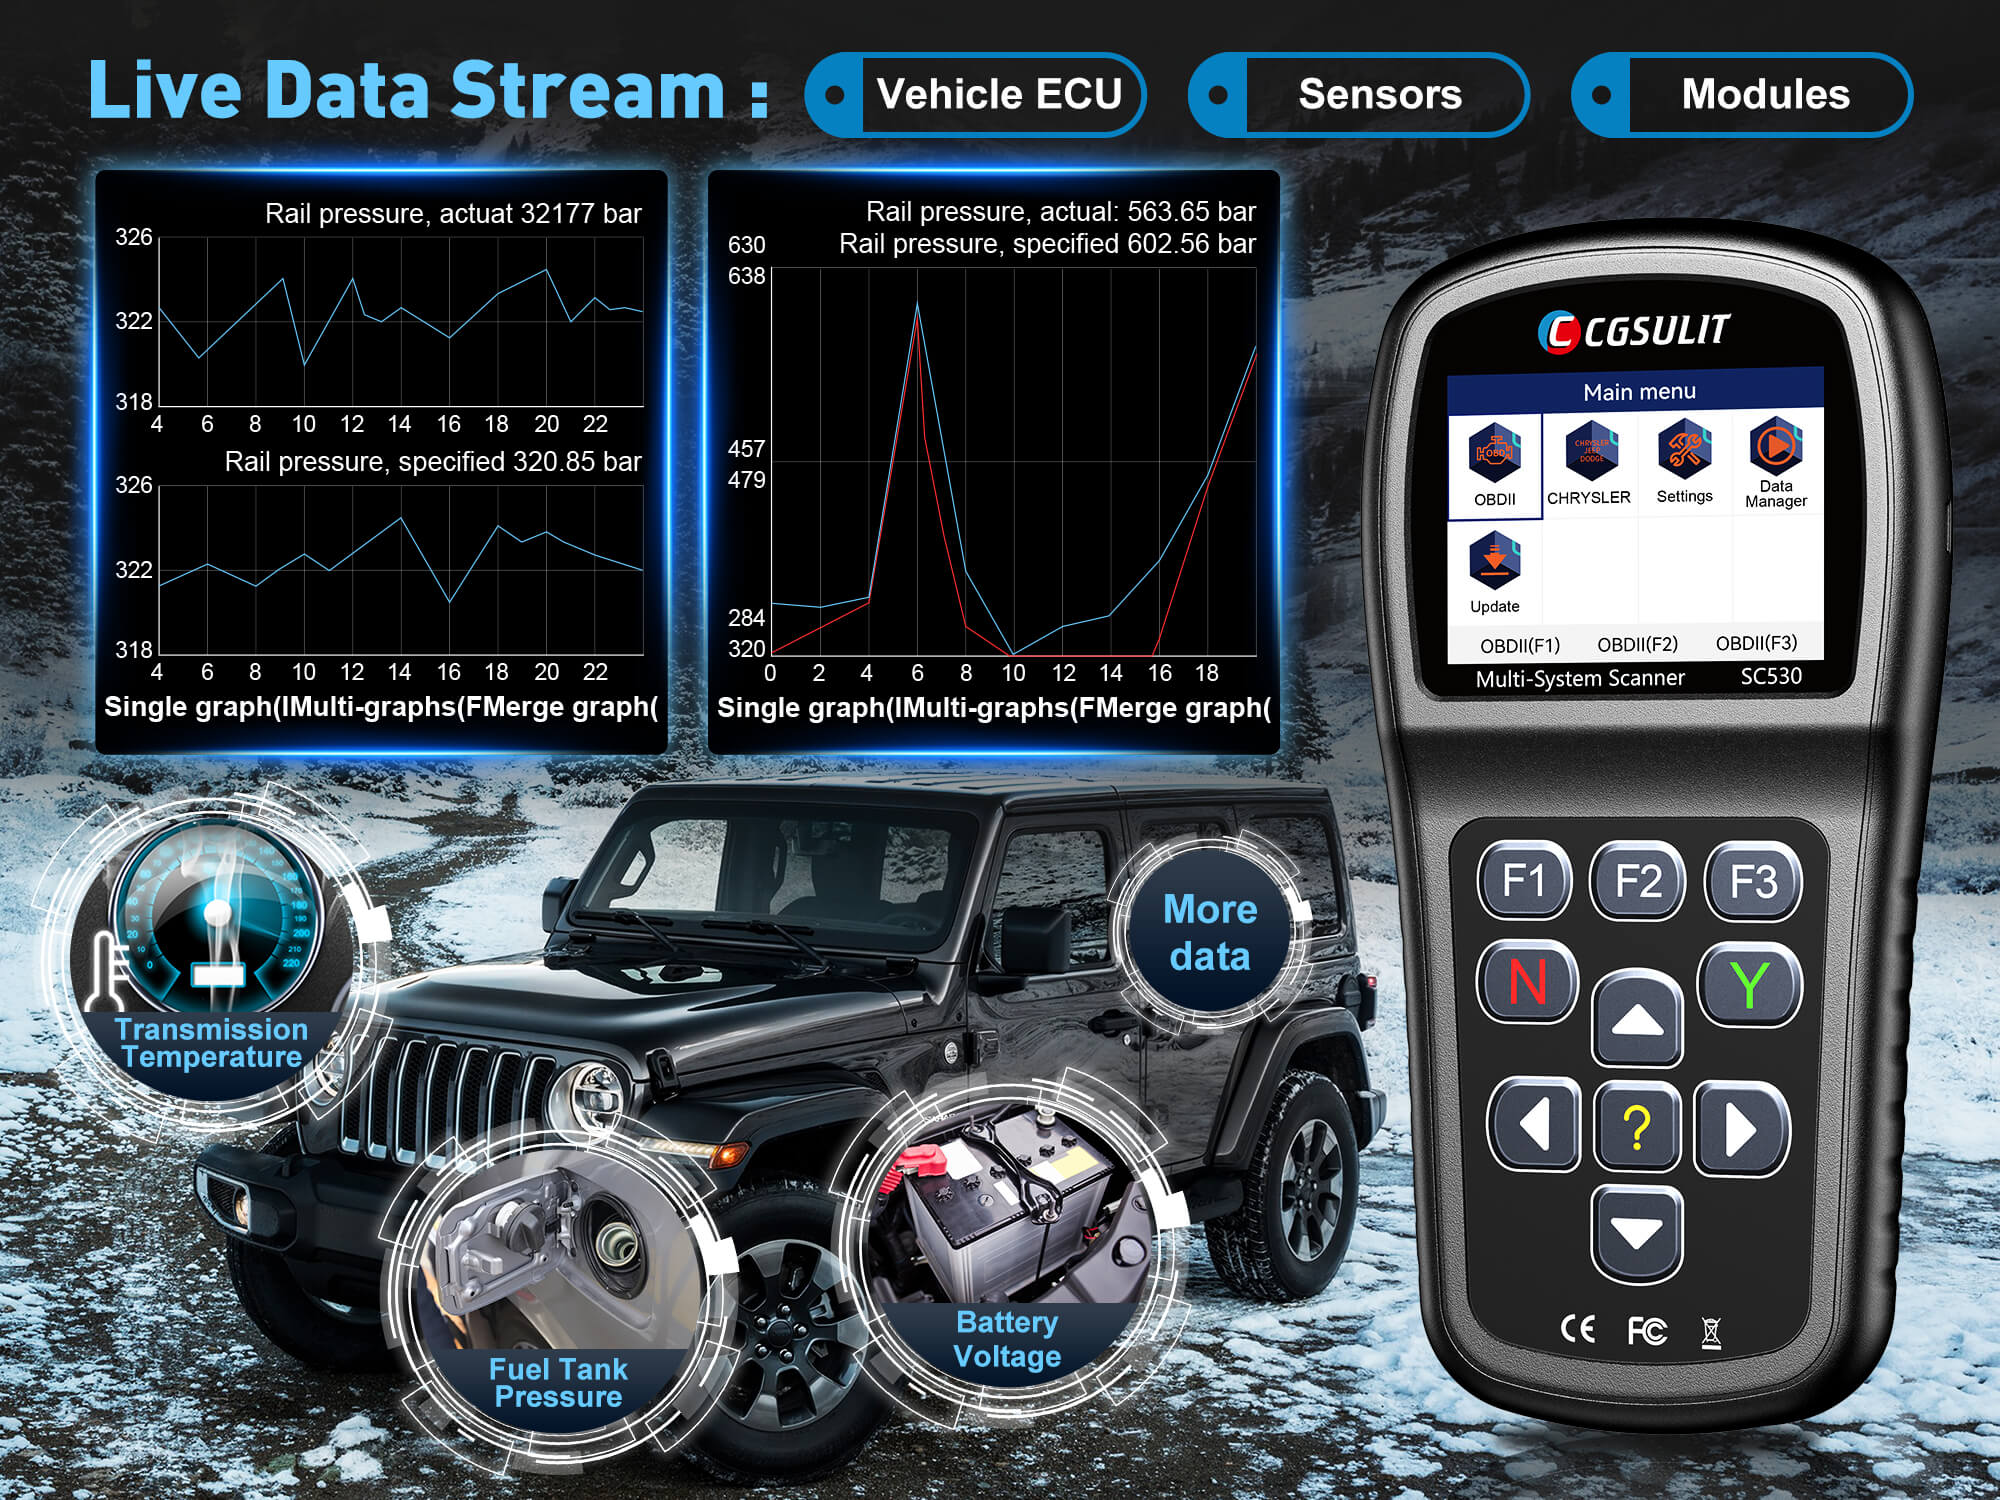 SC530 Shows Live Data Stream of Vehicle ECU, Sensor and Modules. Single, multiple and merged graphs are supported.